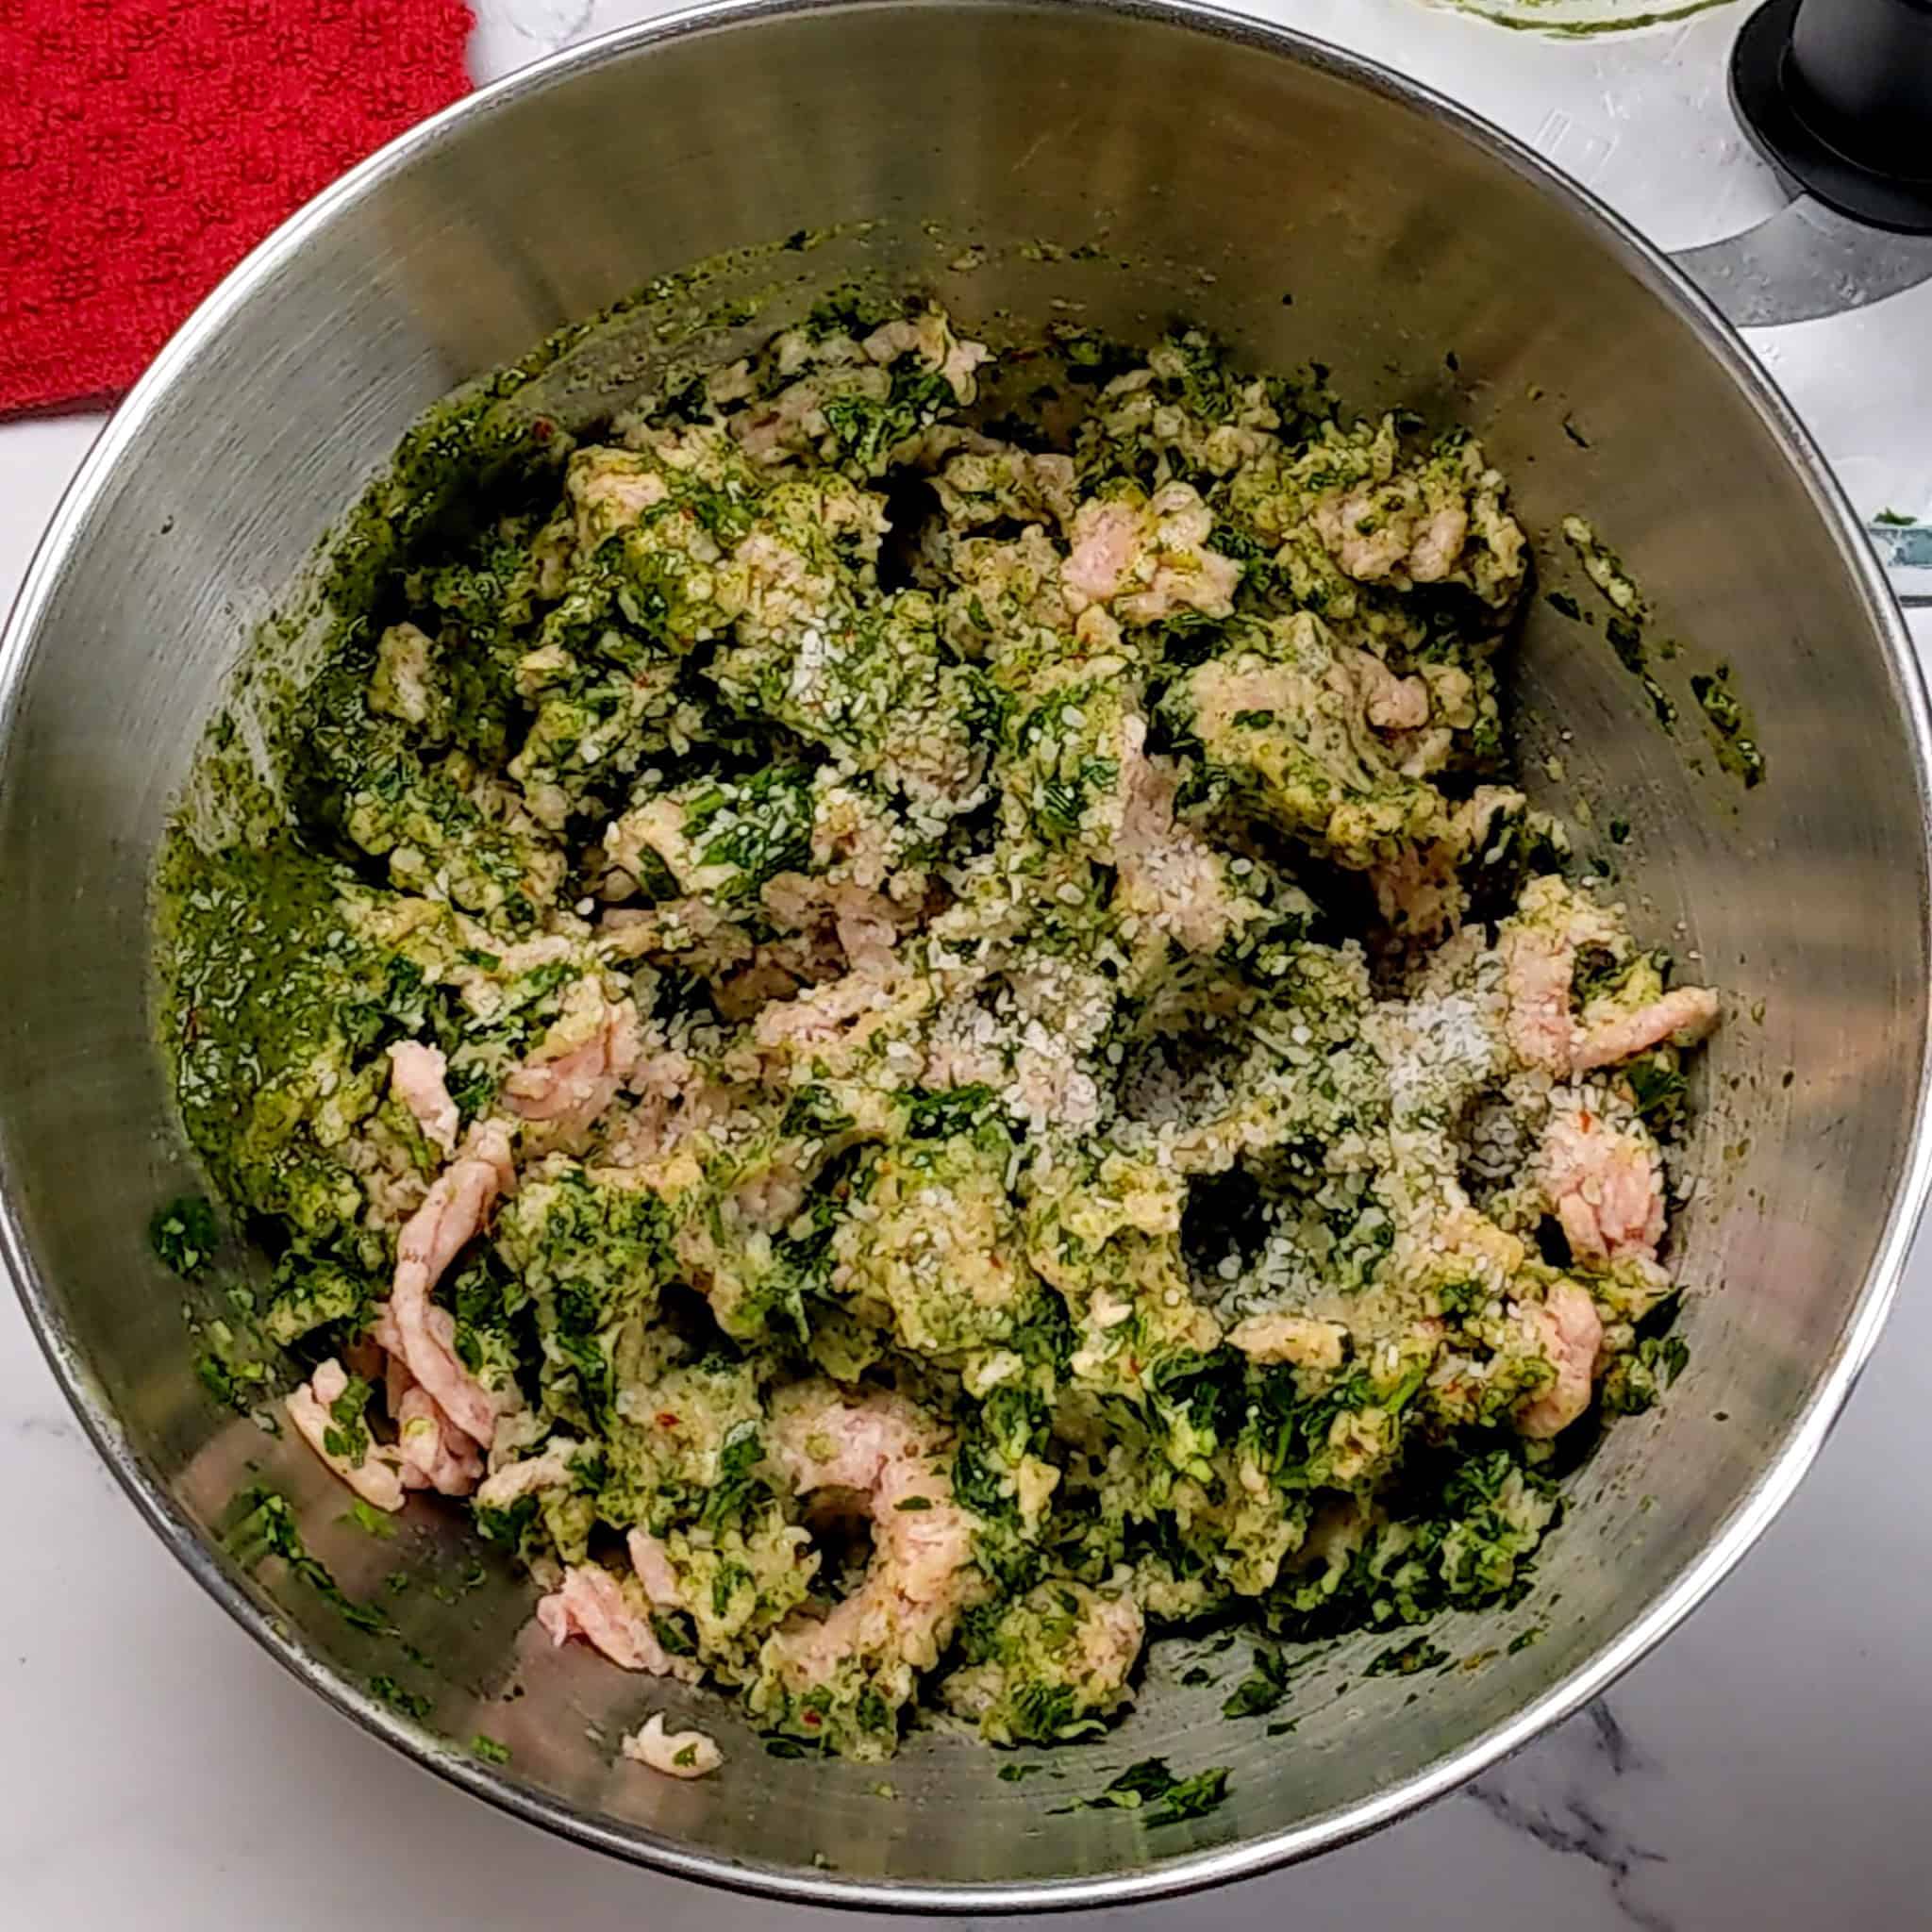 store bought ground chicken with zhug, and an aromatic paste of parsley, shallots and garlic in a stainless steel mixing bowl combined.